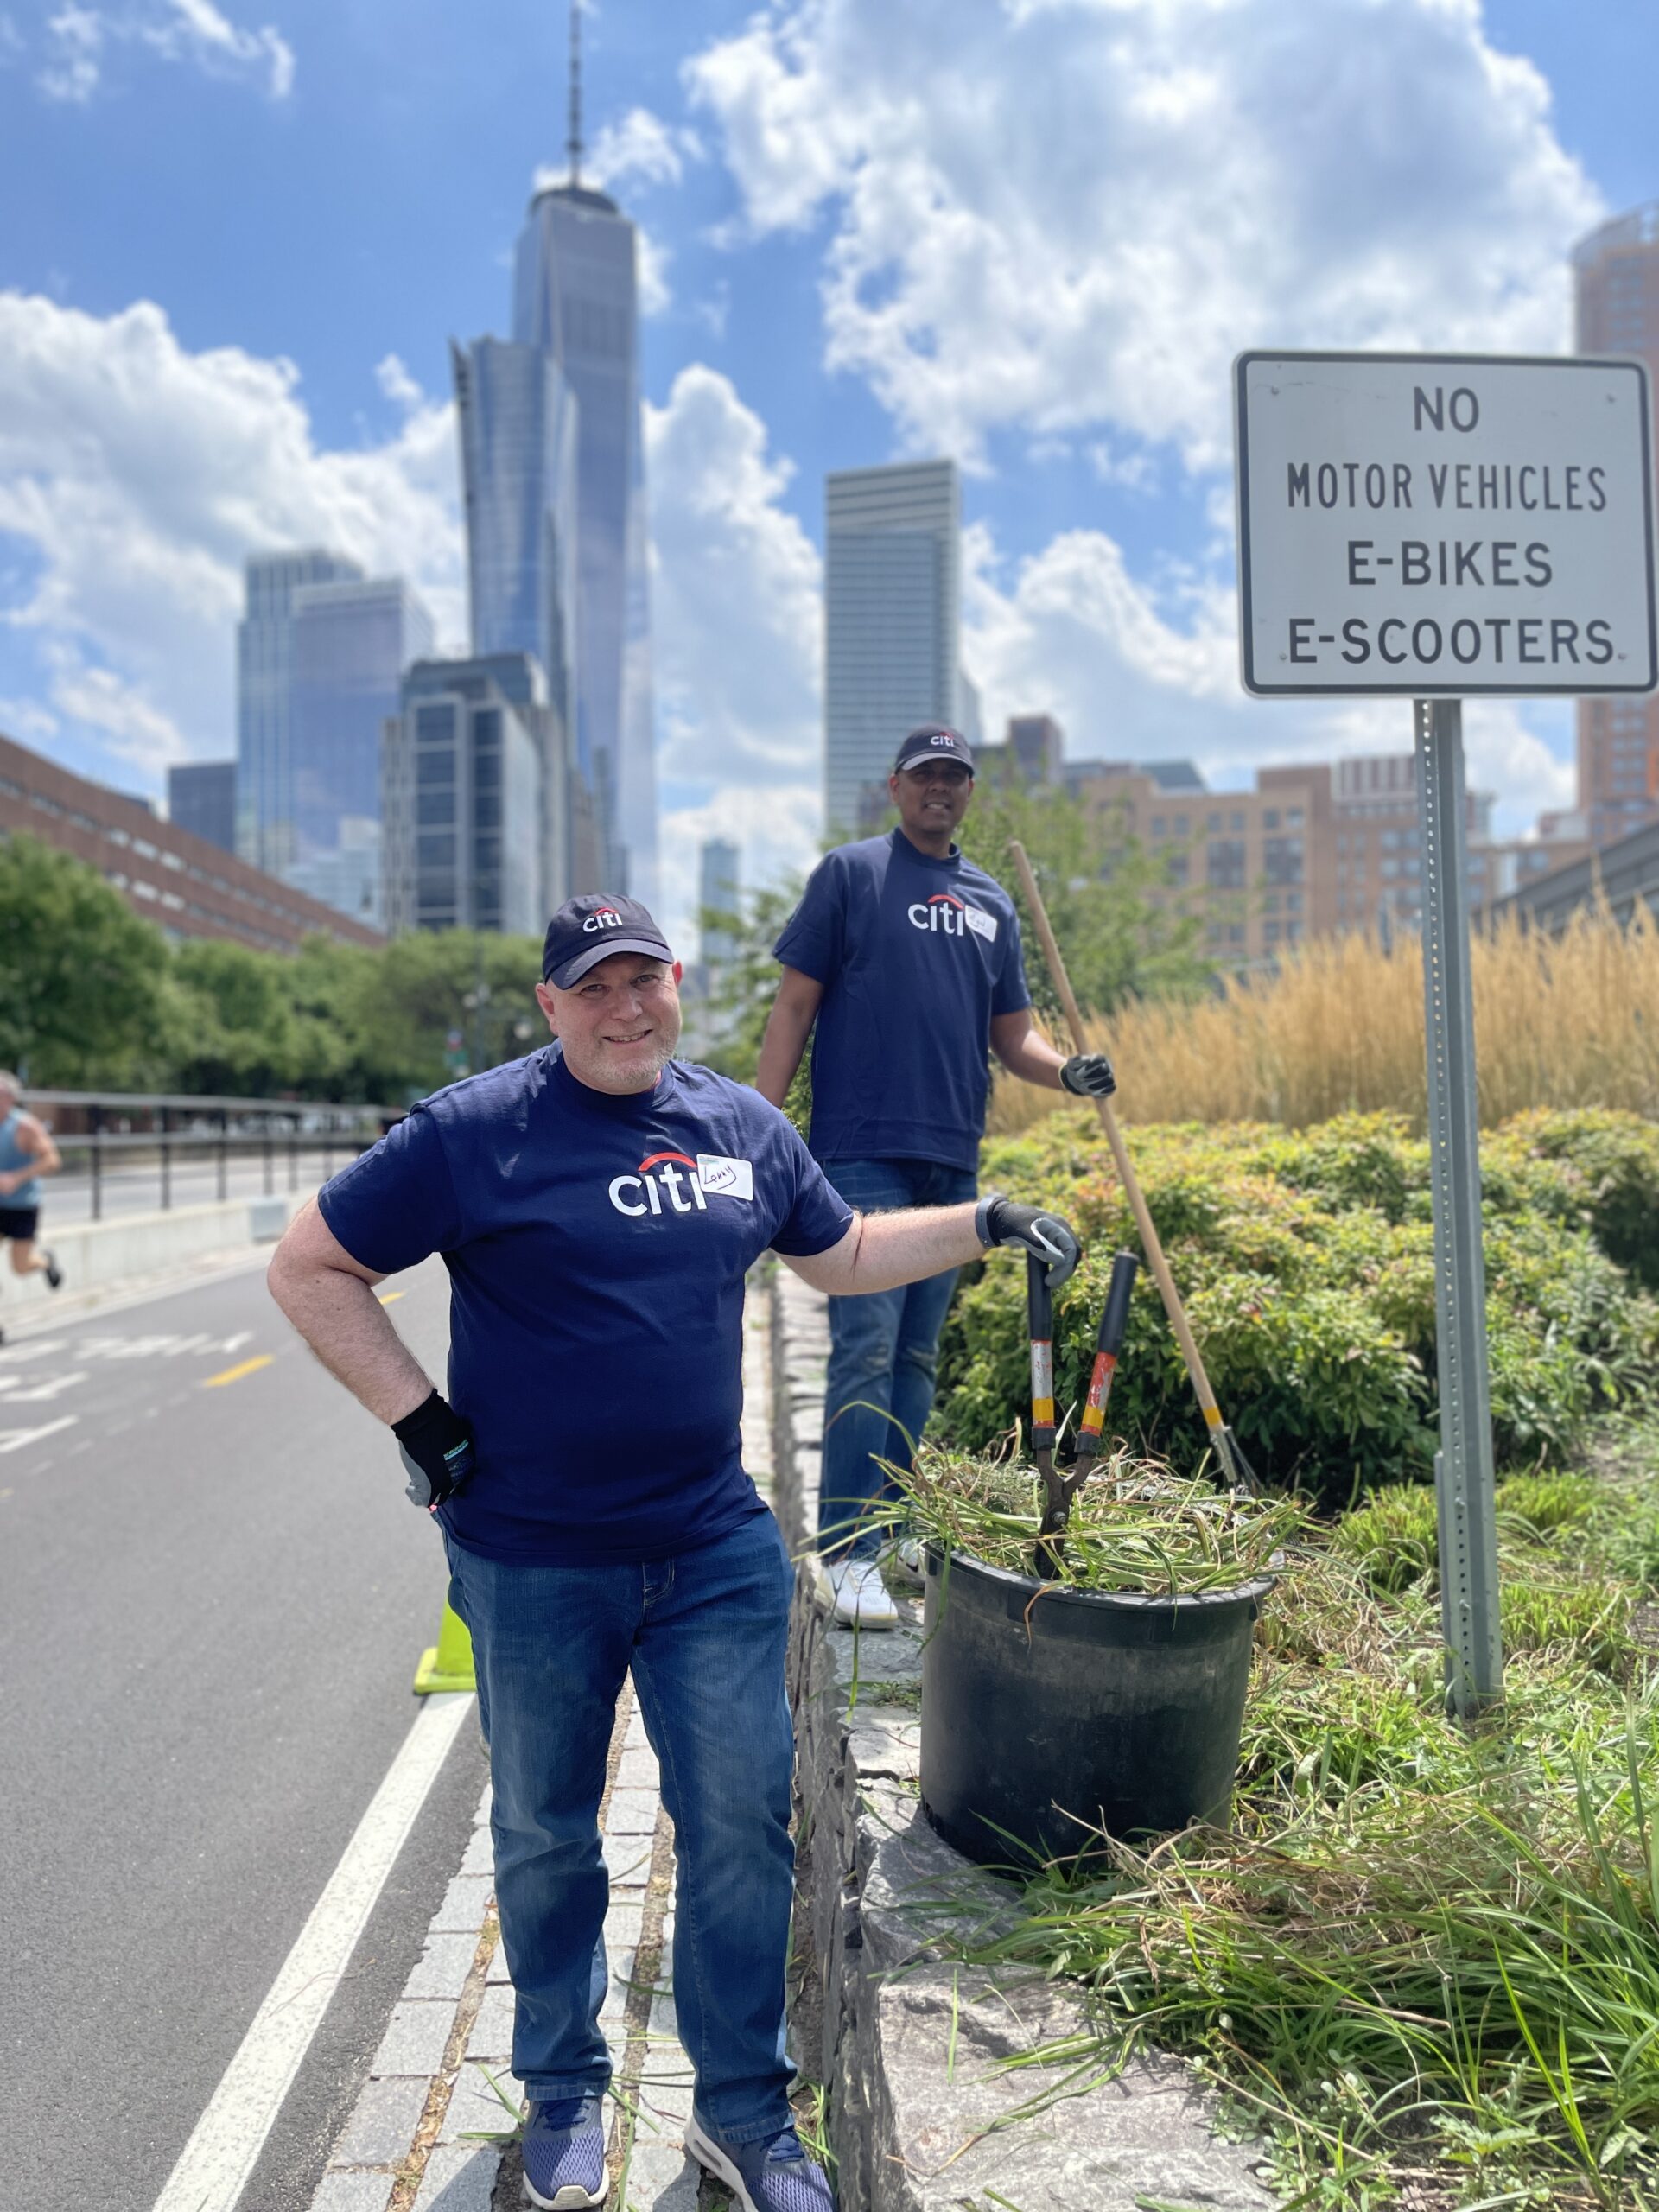 Two volunteers from Citi clearing plants and weeds along part of the Hudson River Greenway